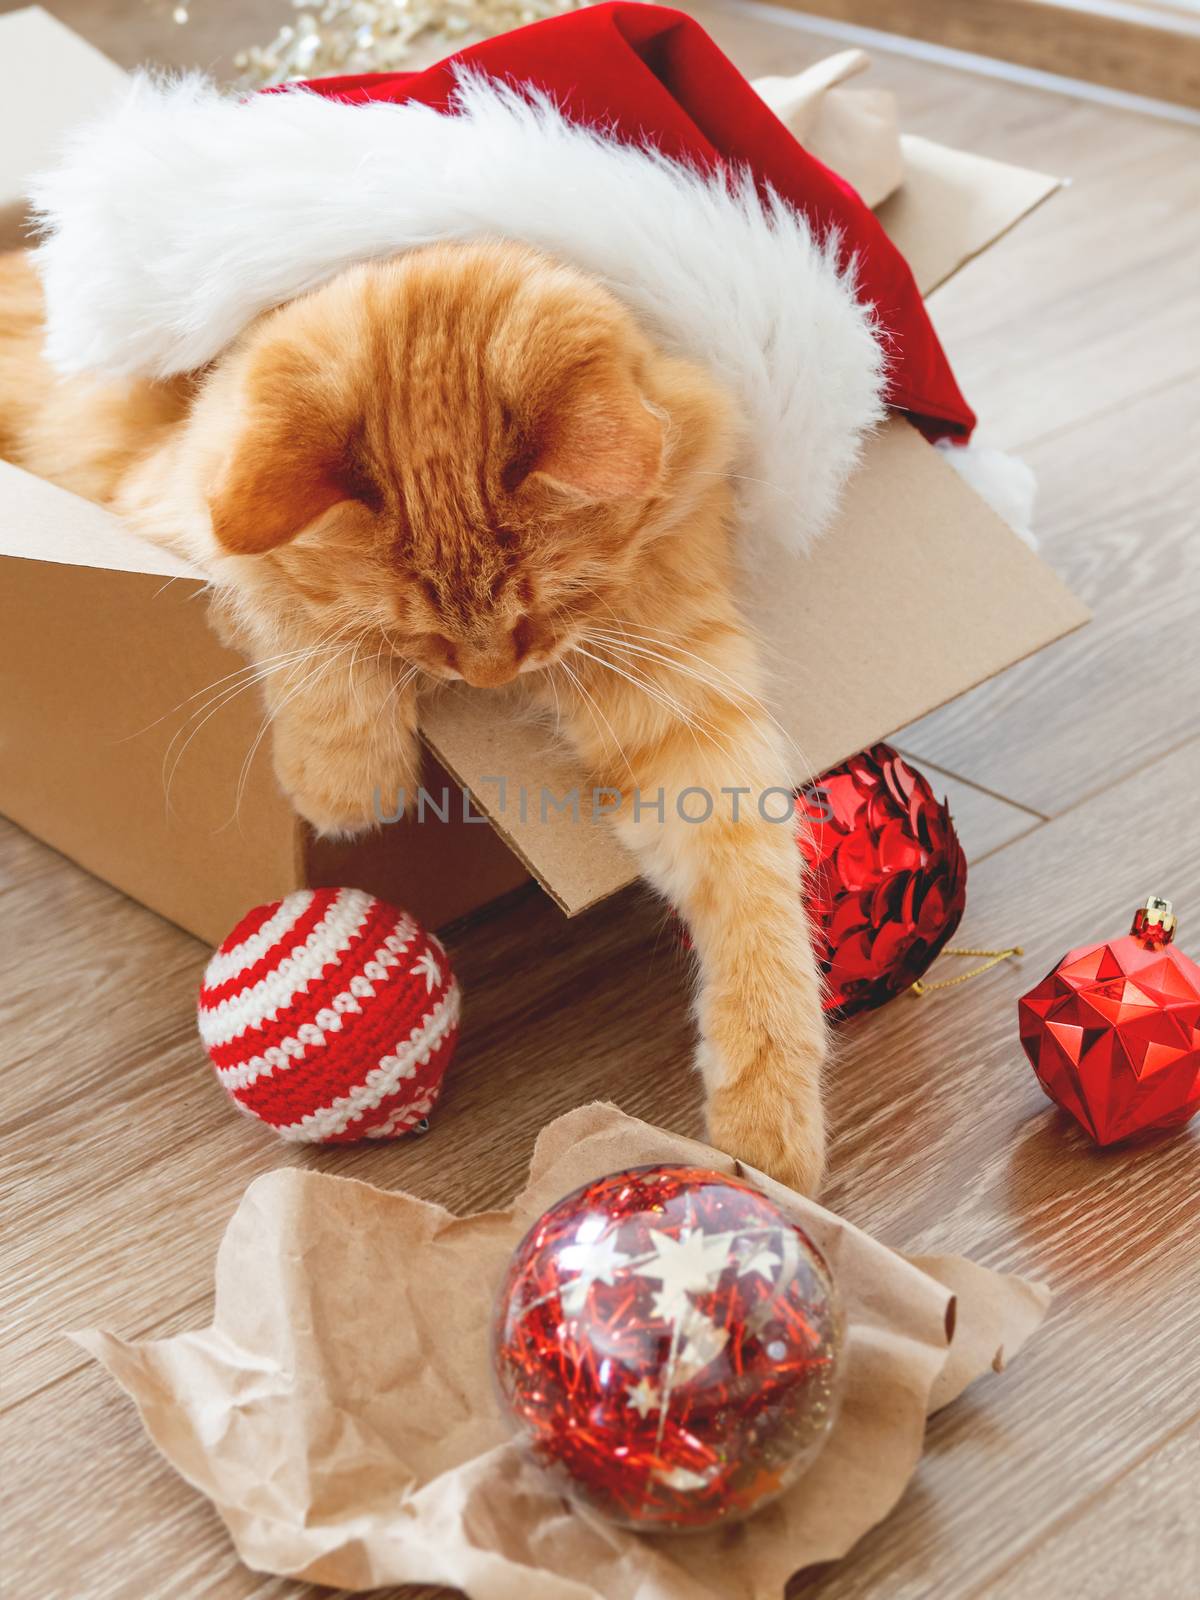 Cute ginger cat lies in box with Christmas and New Year decorations on wooden background. Fluffy pet with red Santa Claus hat. Fuzzy domestic animal during winter holiday preparation.